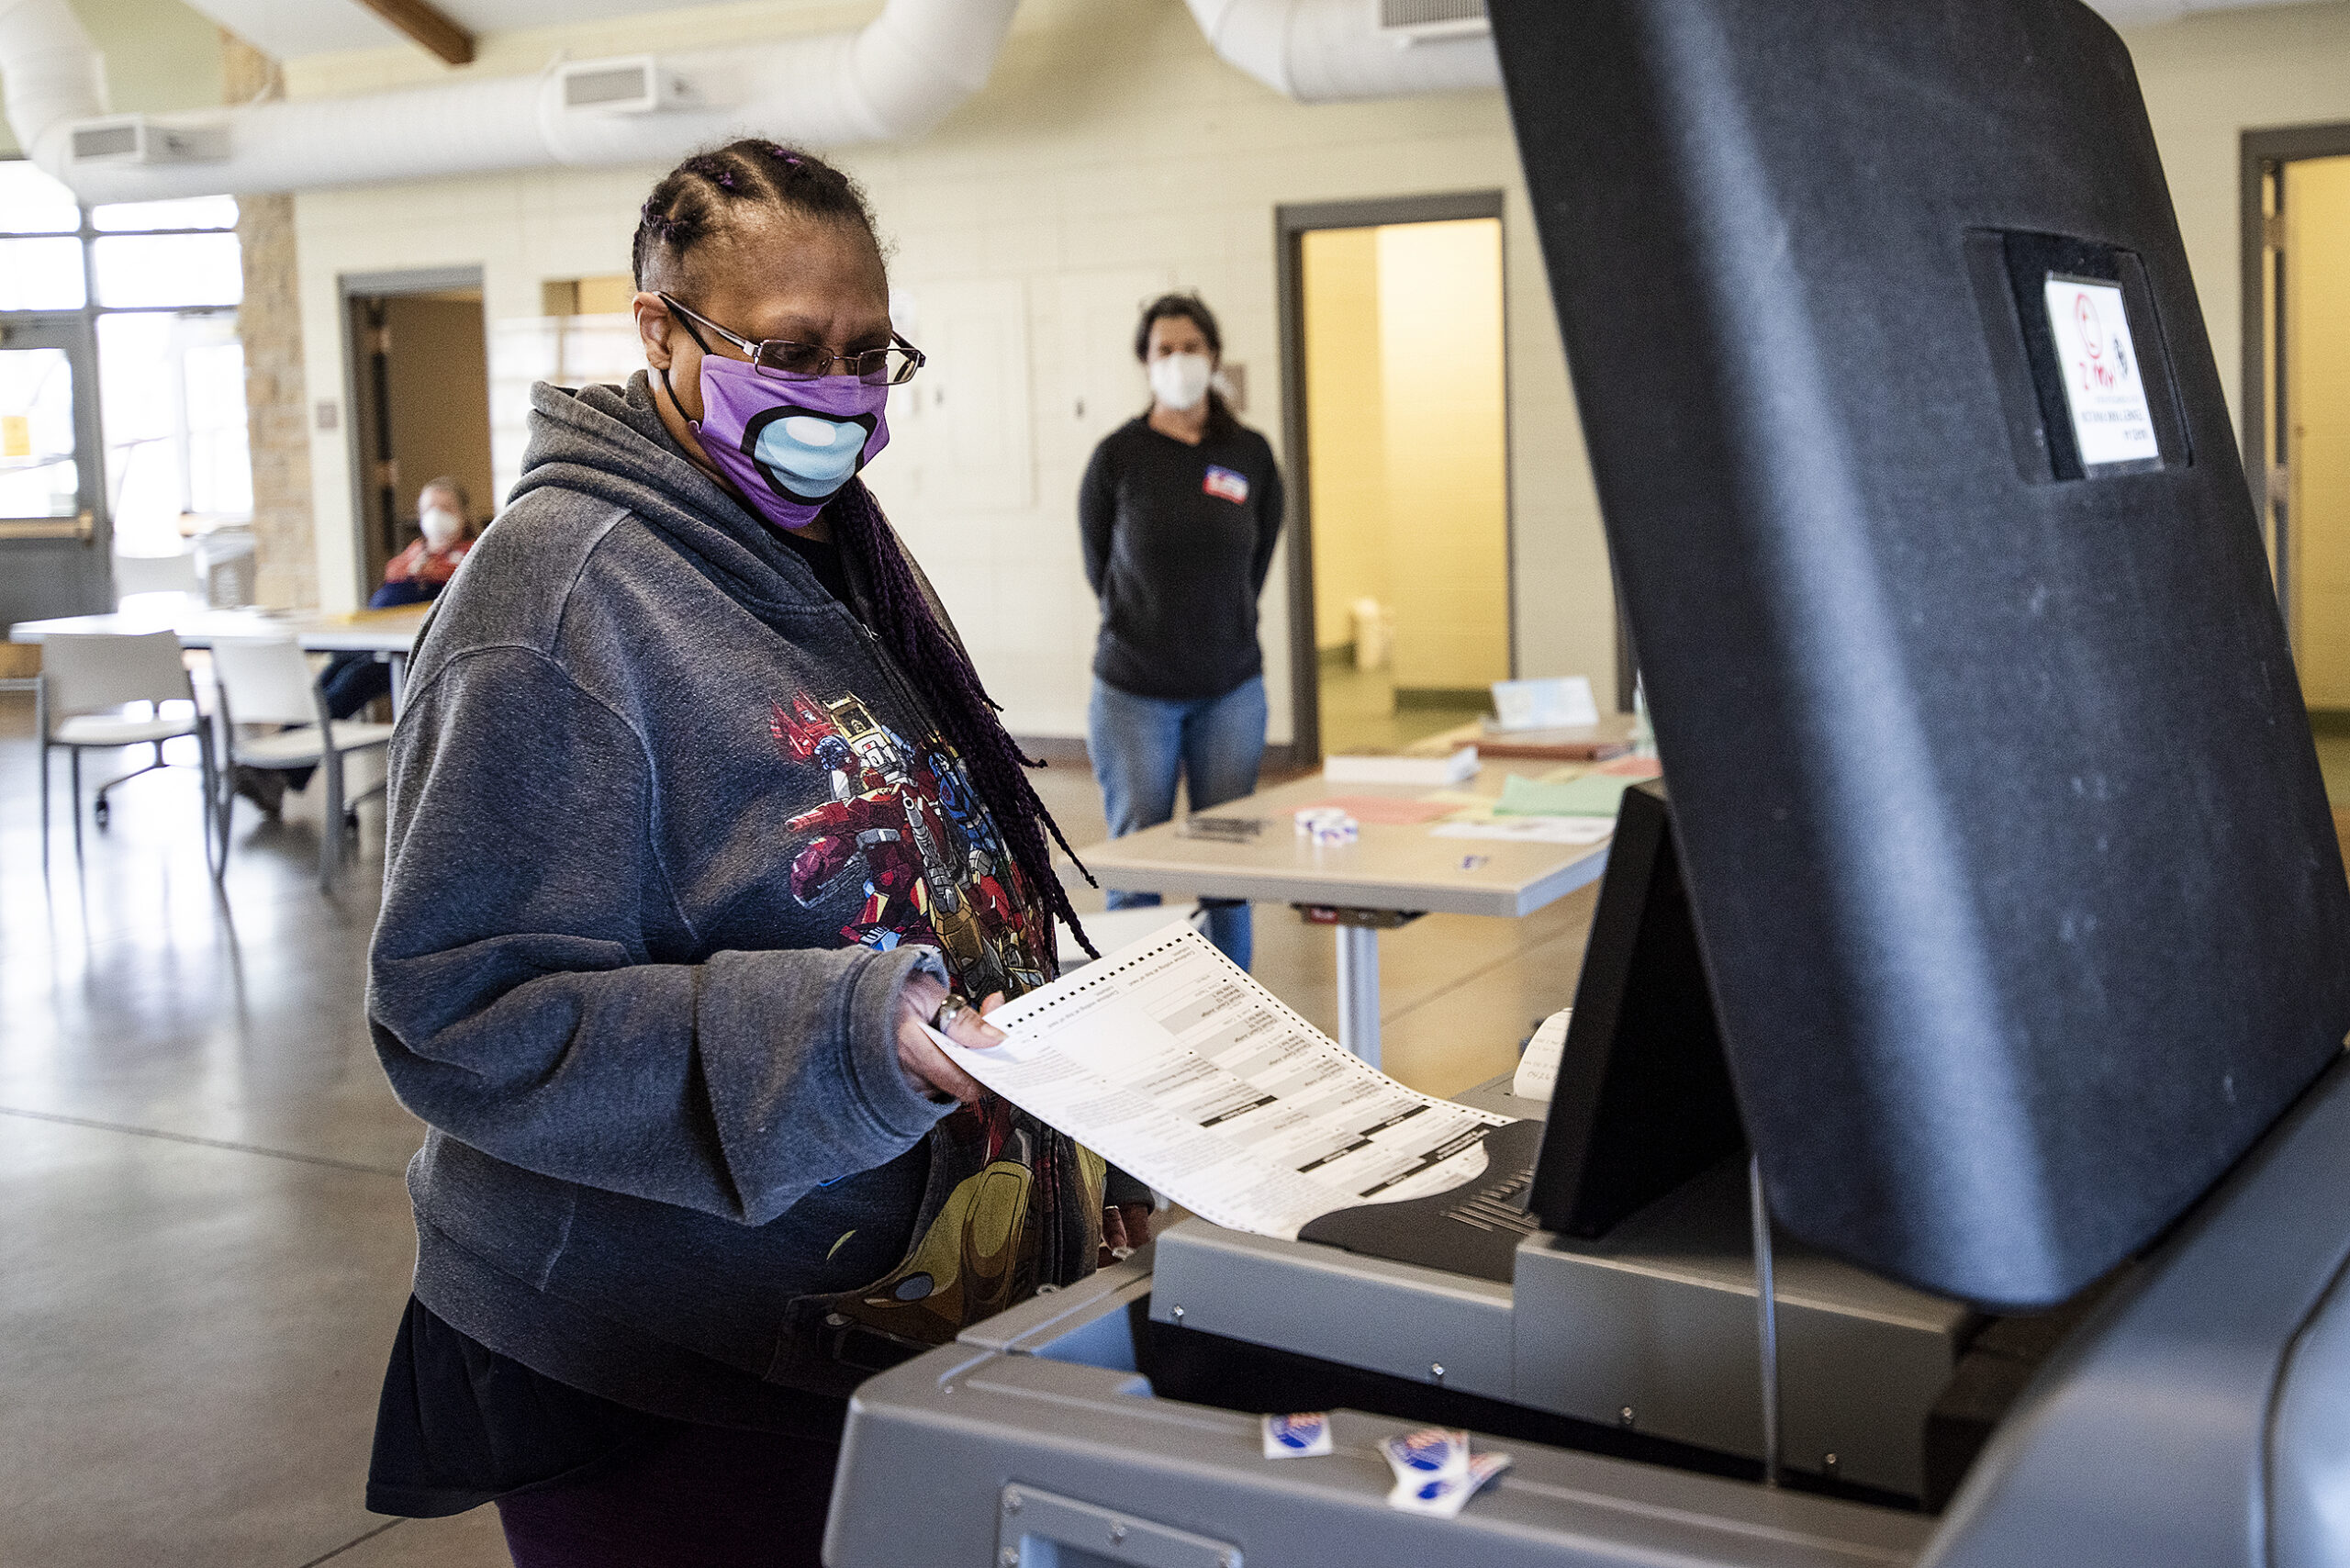 GOP election bills would make Legislature more powerful and absentee voting more difficult